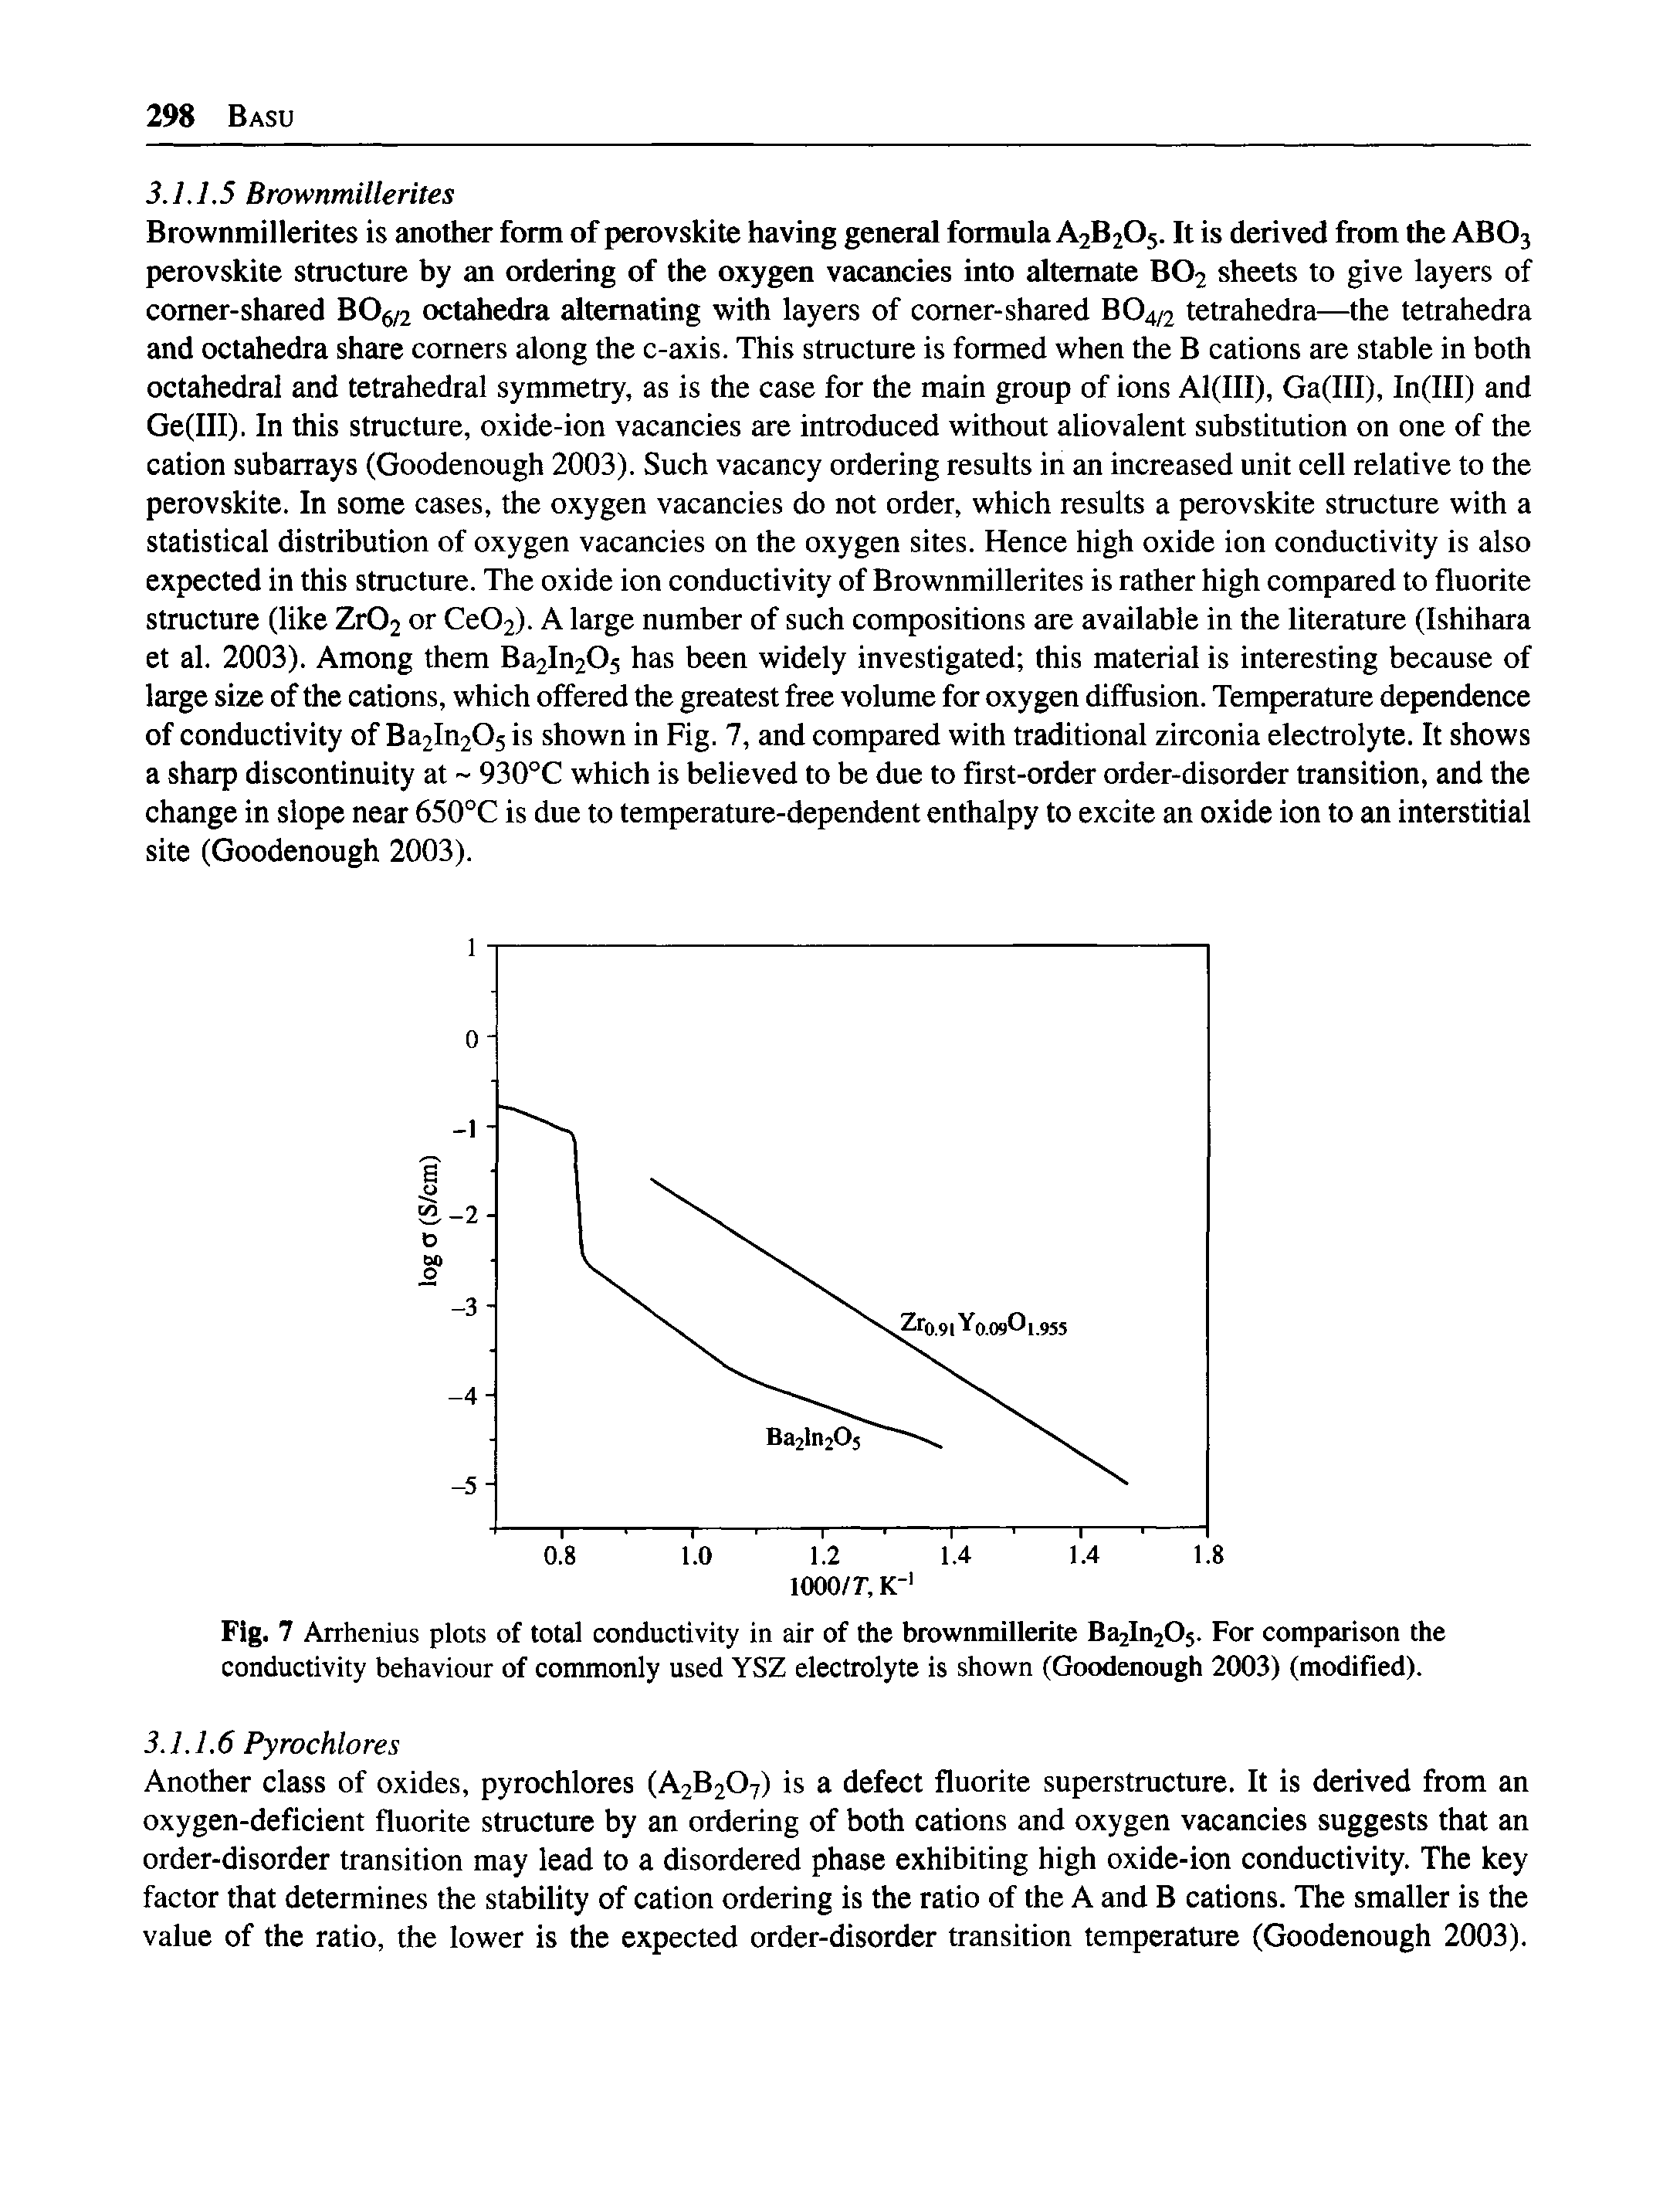 Fig. 7 Arrhenius plots of total conductivity in air of the brownmillerite Ba2ln205. For comparison the conductivity behaviour of commonly used YSZ electrolyte is shown (Goodenough 2003) (modified).